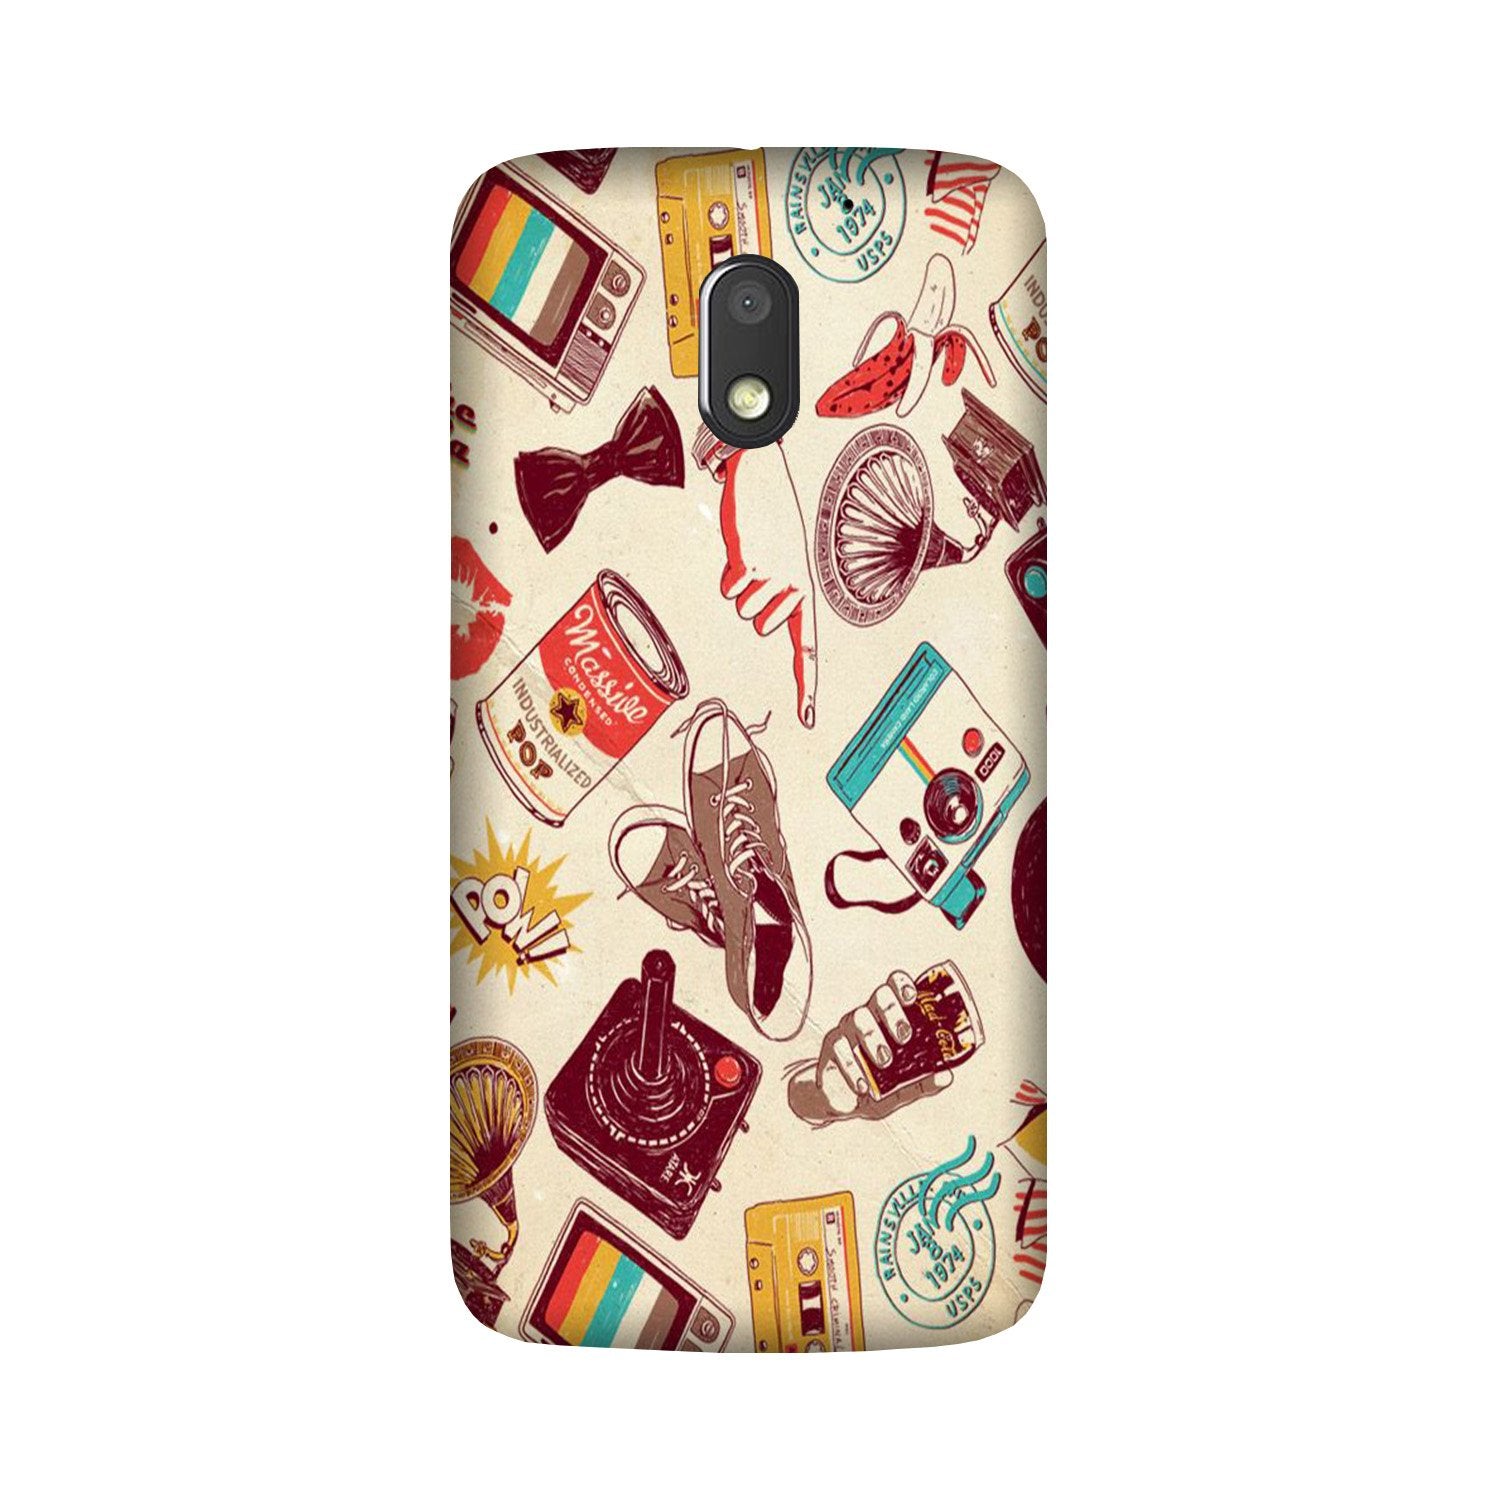 Vintage Case for Moto G4 Play